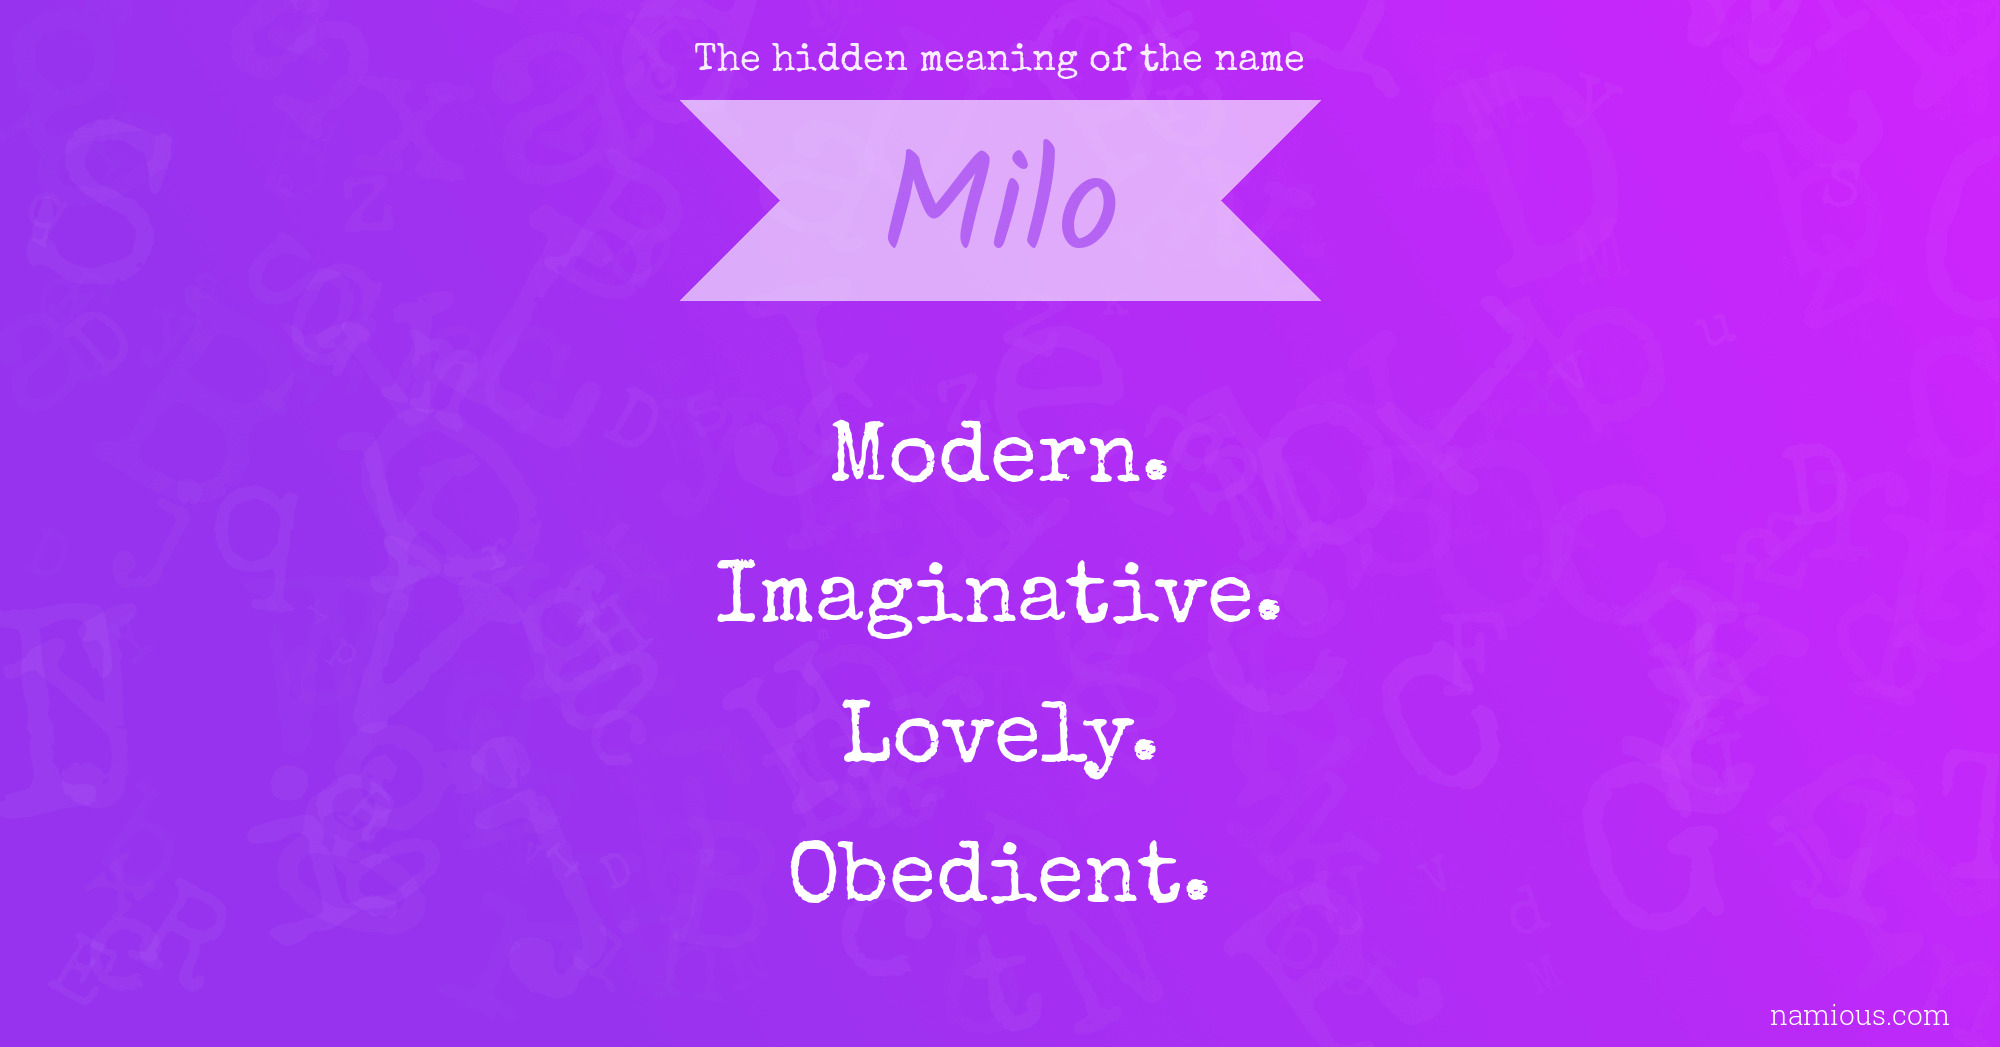 The hidden meaning of the name Milo